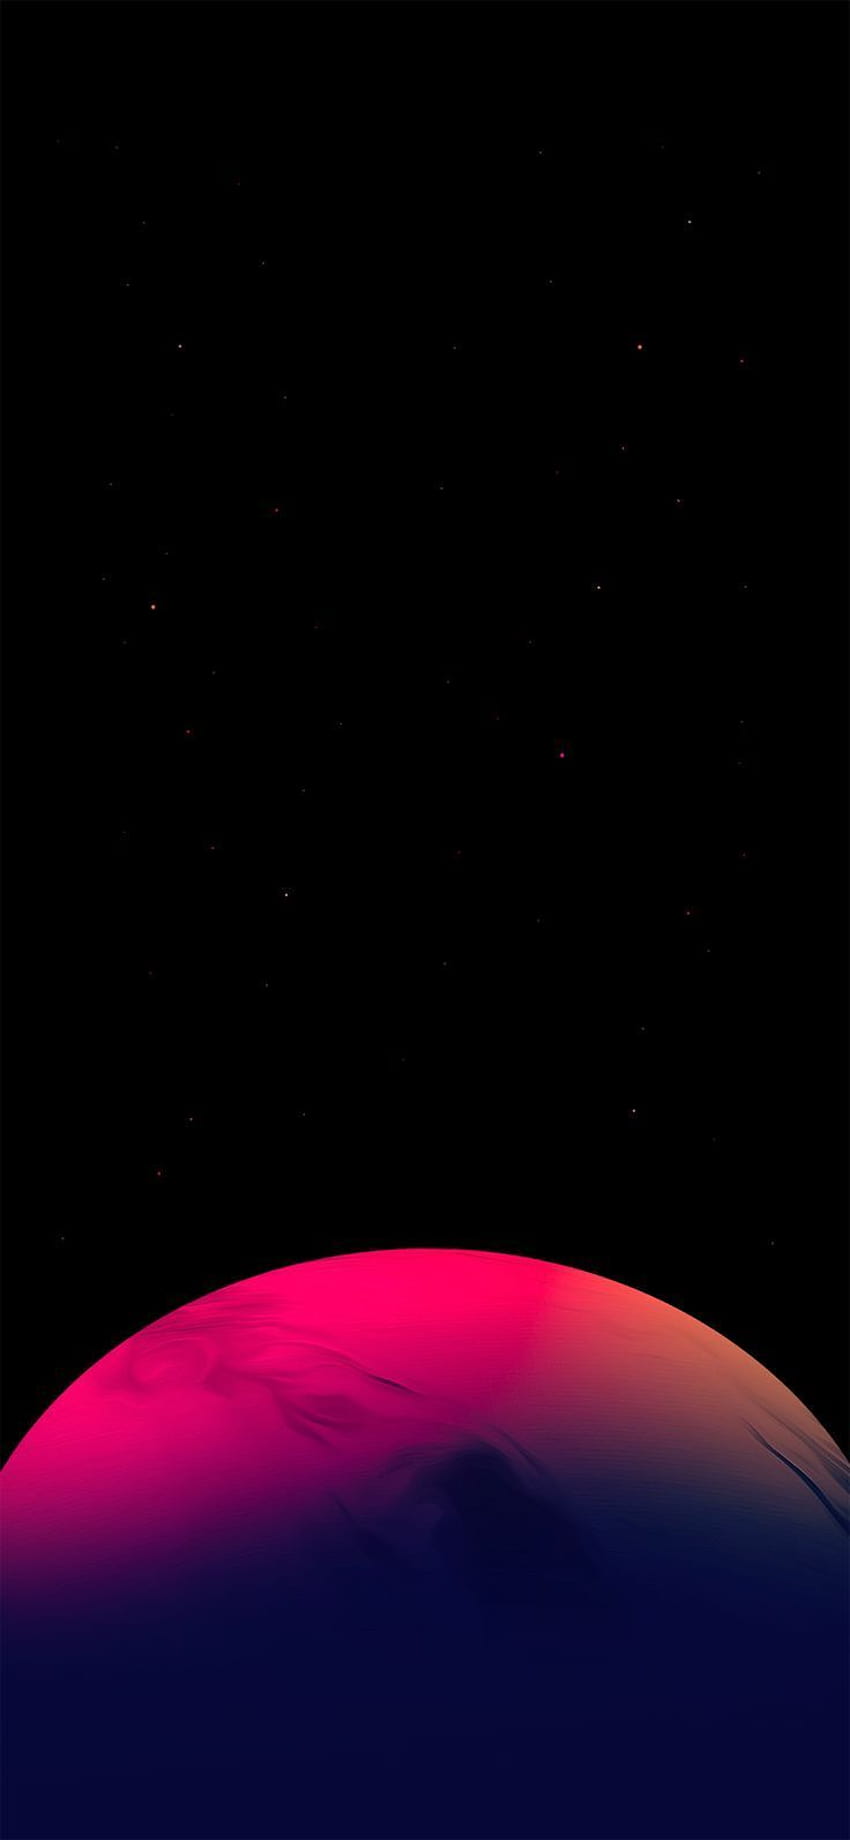  Sunset in the mountain for iPhone XS Max Amoled Dark Amoled Wallpaper  Free Download